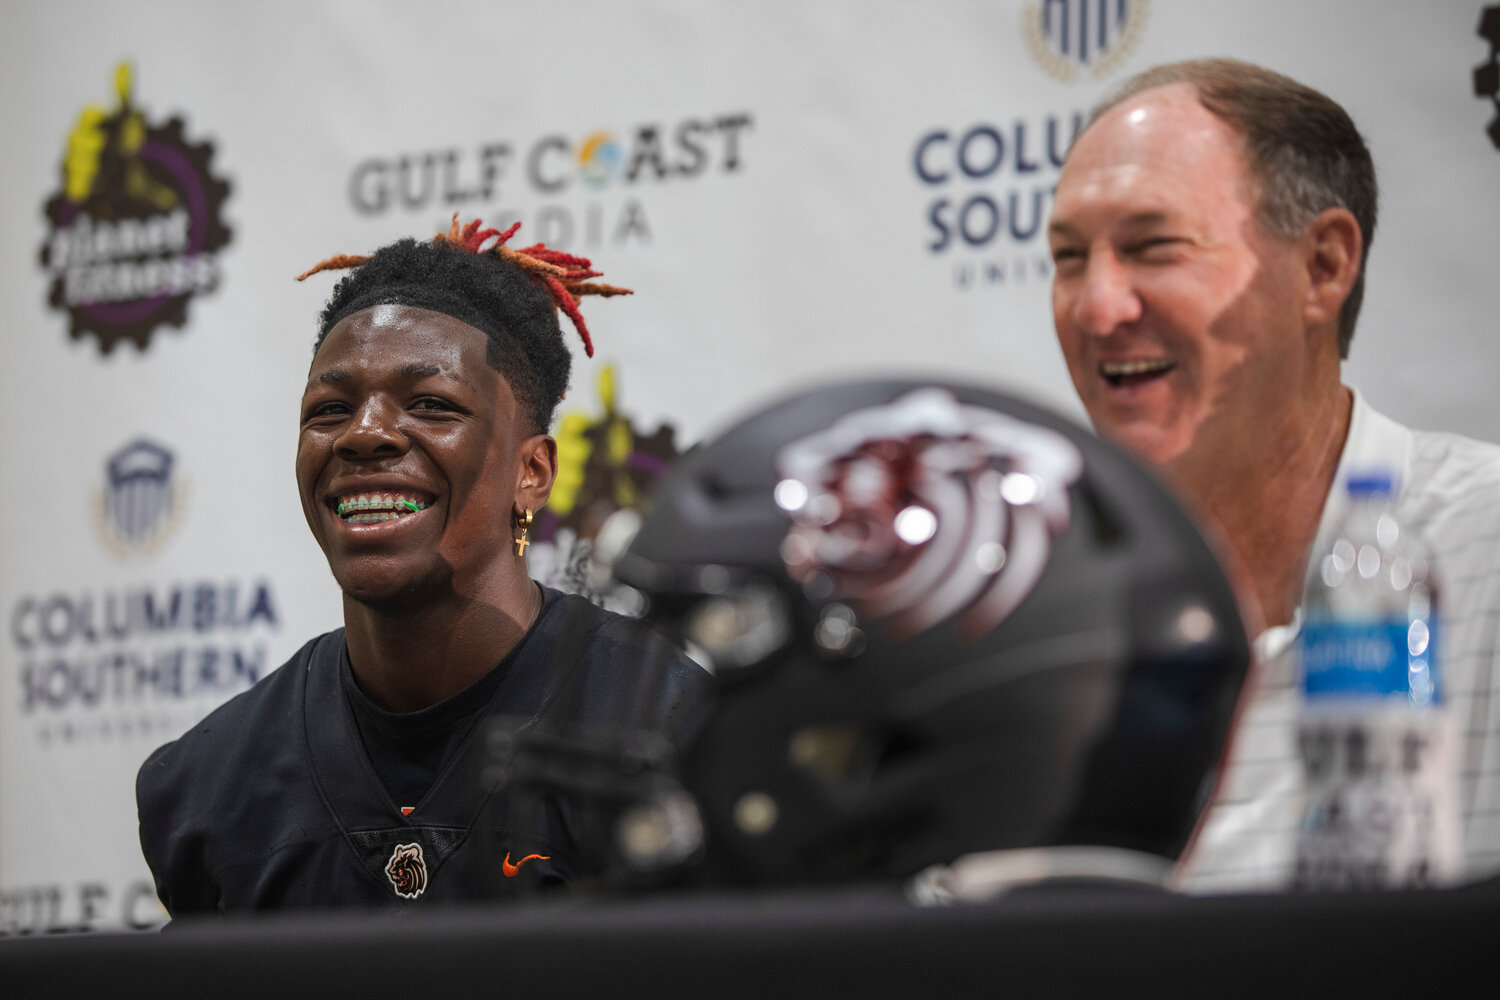 Baldwin County athlete Ti Mims and Tiger head football coach Scott Rials react to one of the non-football questions asked during the second-annual Gulf Coast Media Day at the Orange Beach Event Center on July 27. Rials said Mims and the receivers could be one of the team’s strengths in 2023.